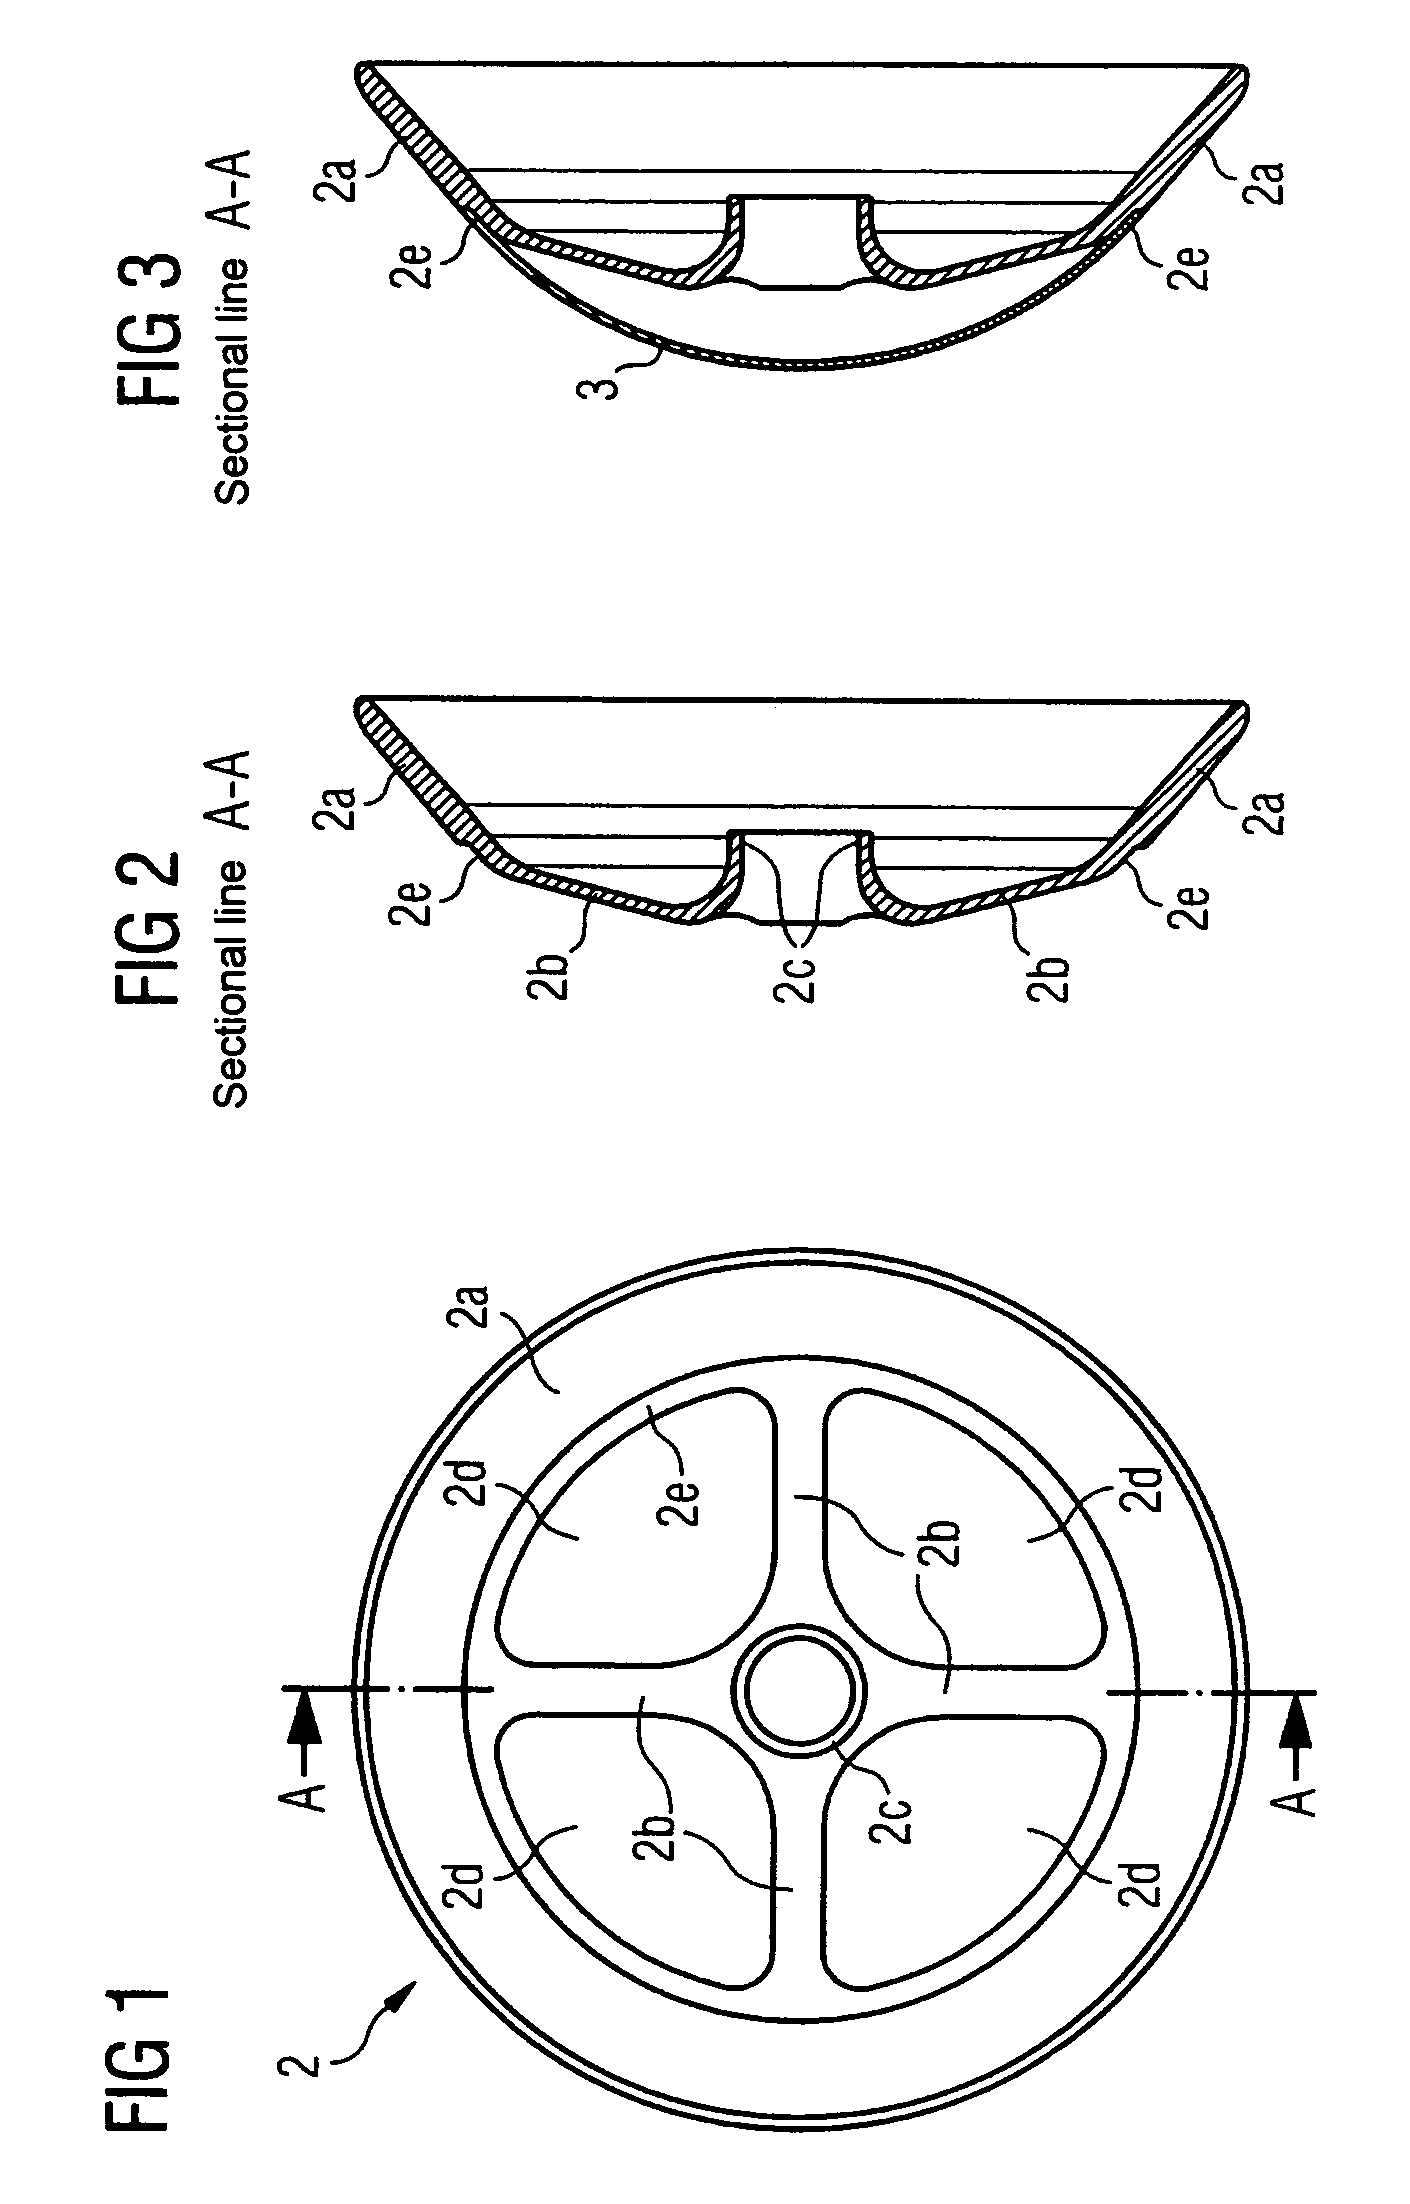 Valve element for supplementary control valve device